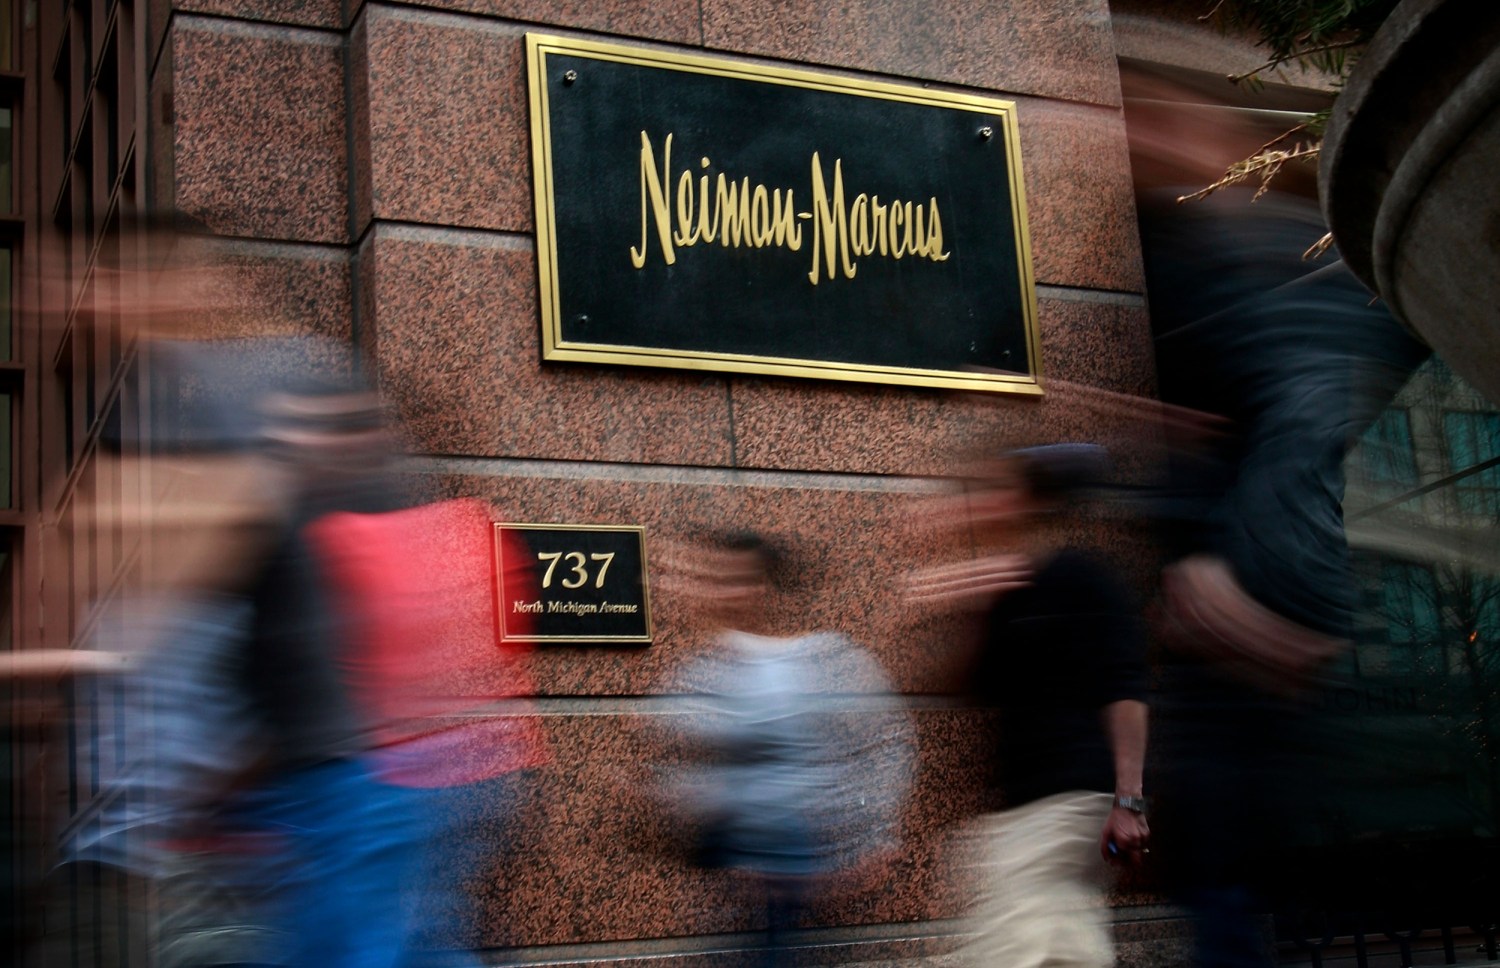 Neiman-Marcus jumped in, going up against established department stores